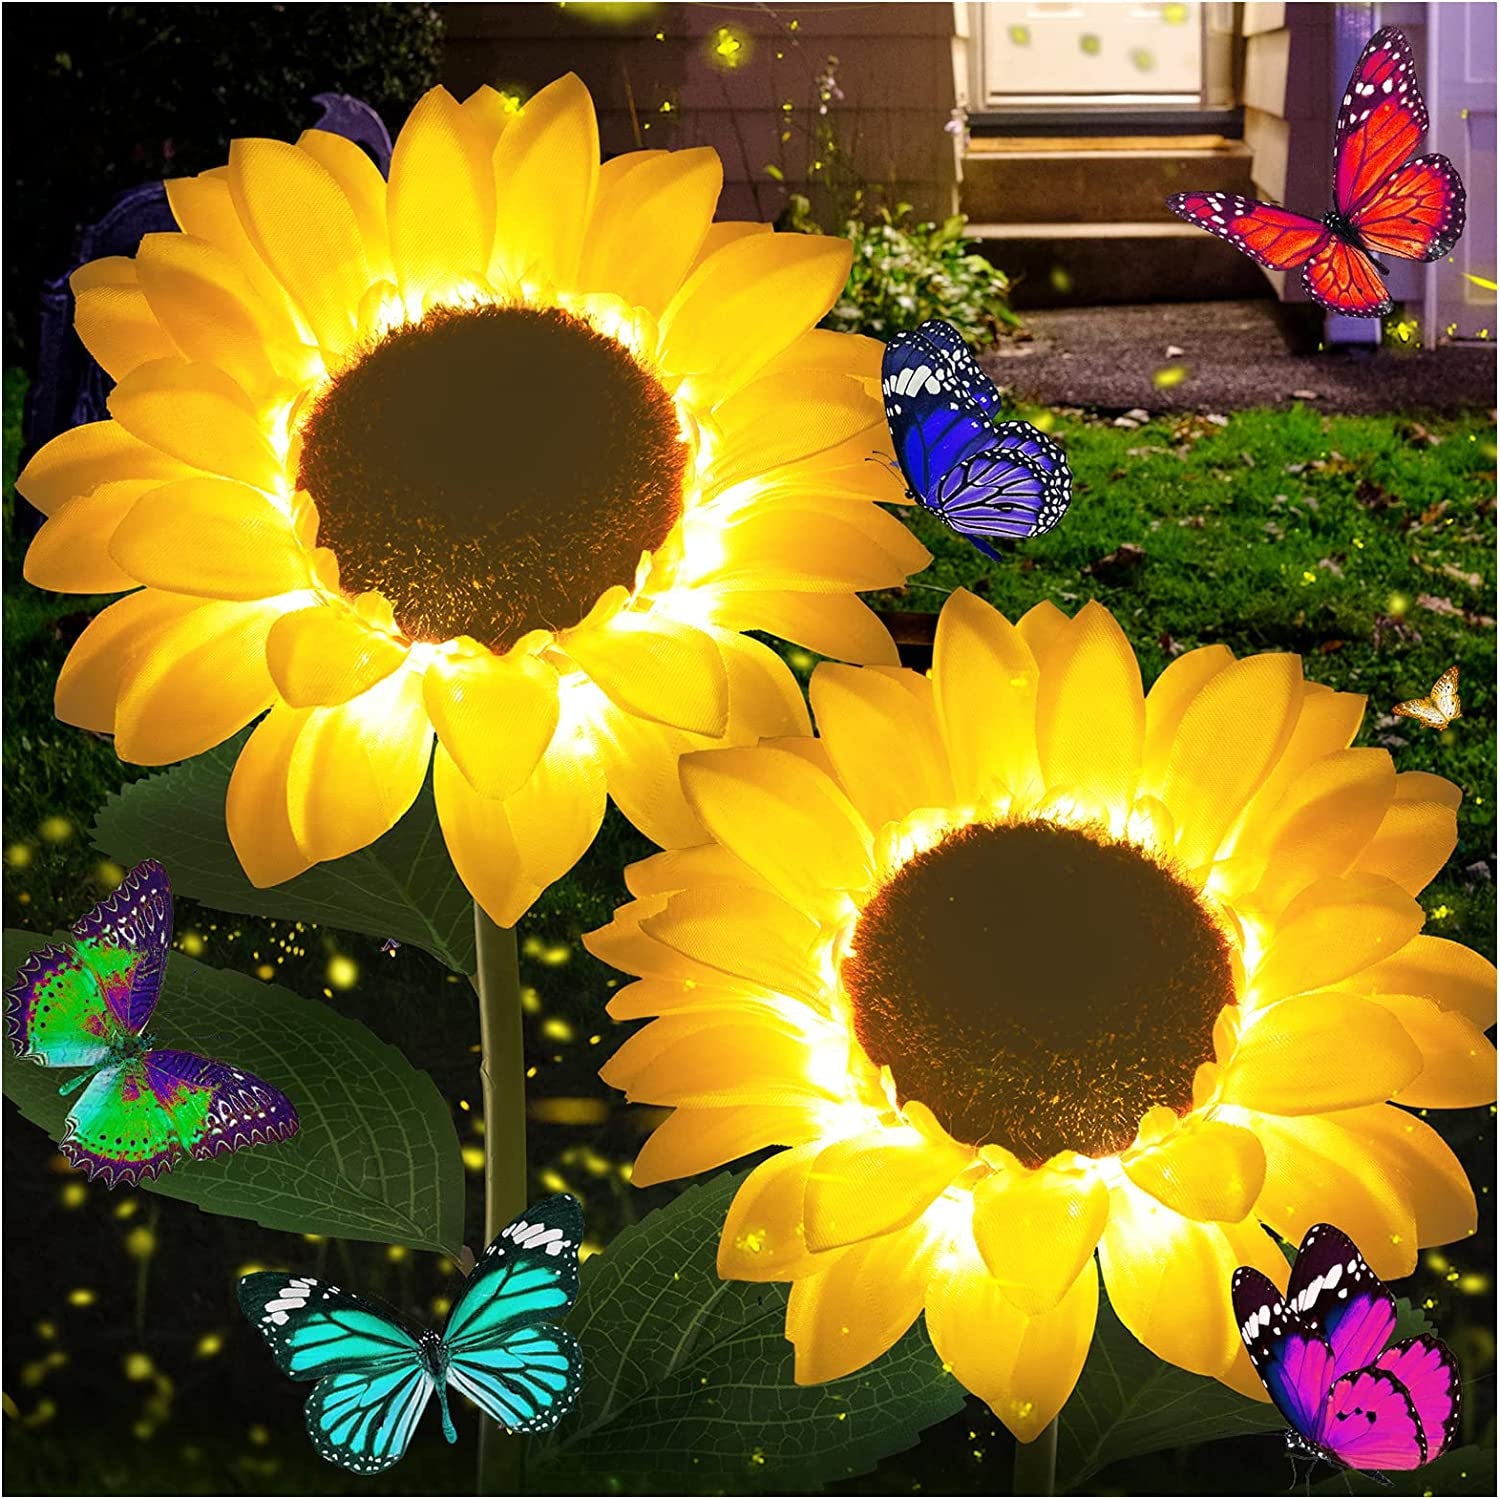 Solar Garden Lights, Newest Version Garland Lily Solar Flower Lights Outdoor Solar Powered Stake Decorative Lights for for Garden, Pathway, Patio, Front Yard Outdoor Decoration